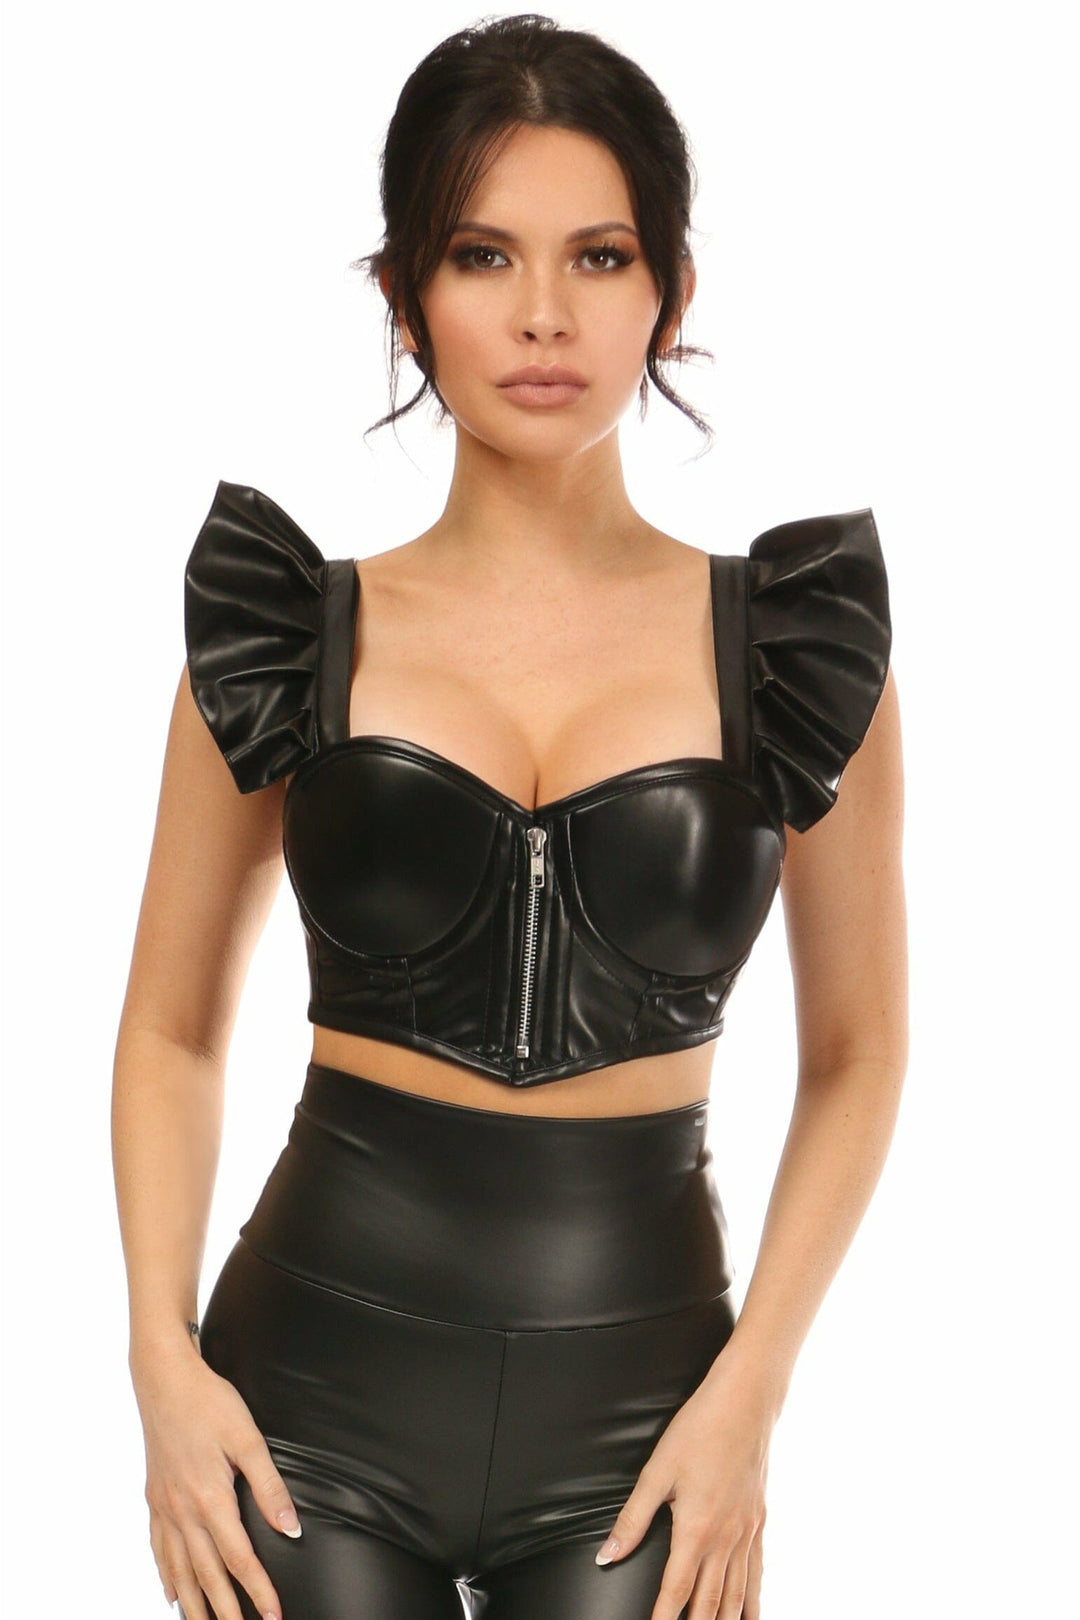 Lavish Black Faux Leather Underwire Bustier Top w/Removable Ruffle Sleeves-Bustier Tops-Daisy Corsets-Black-S-SEXYSHOES.COM